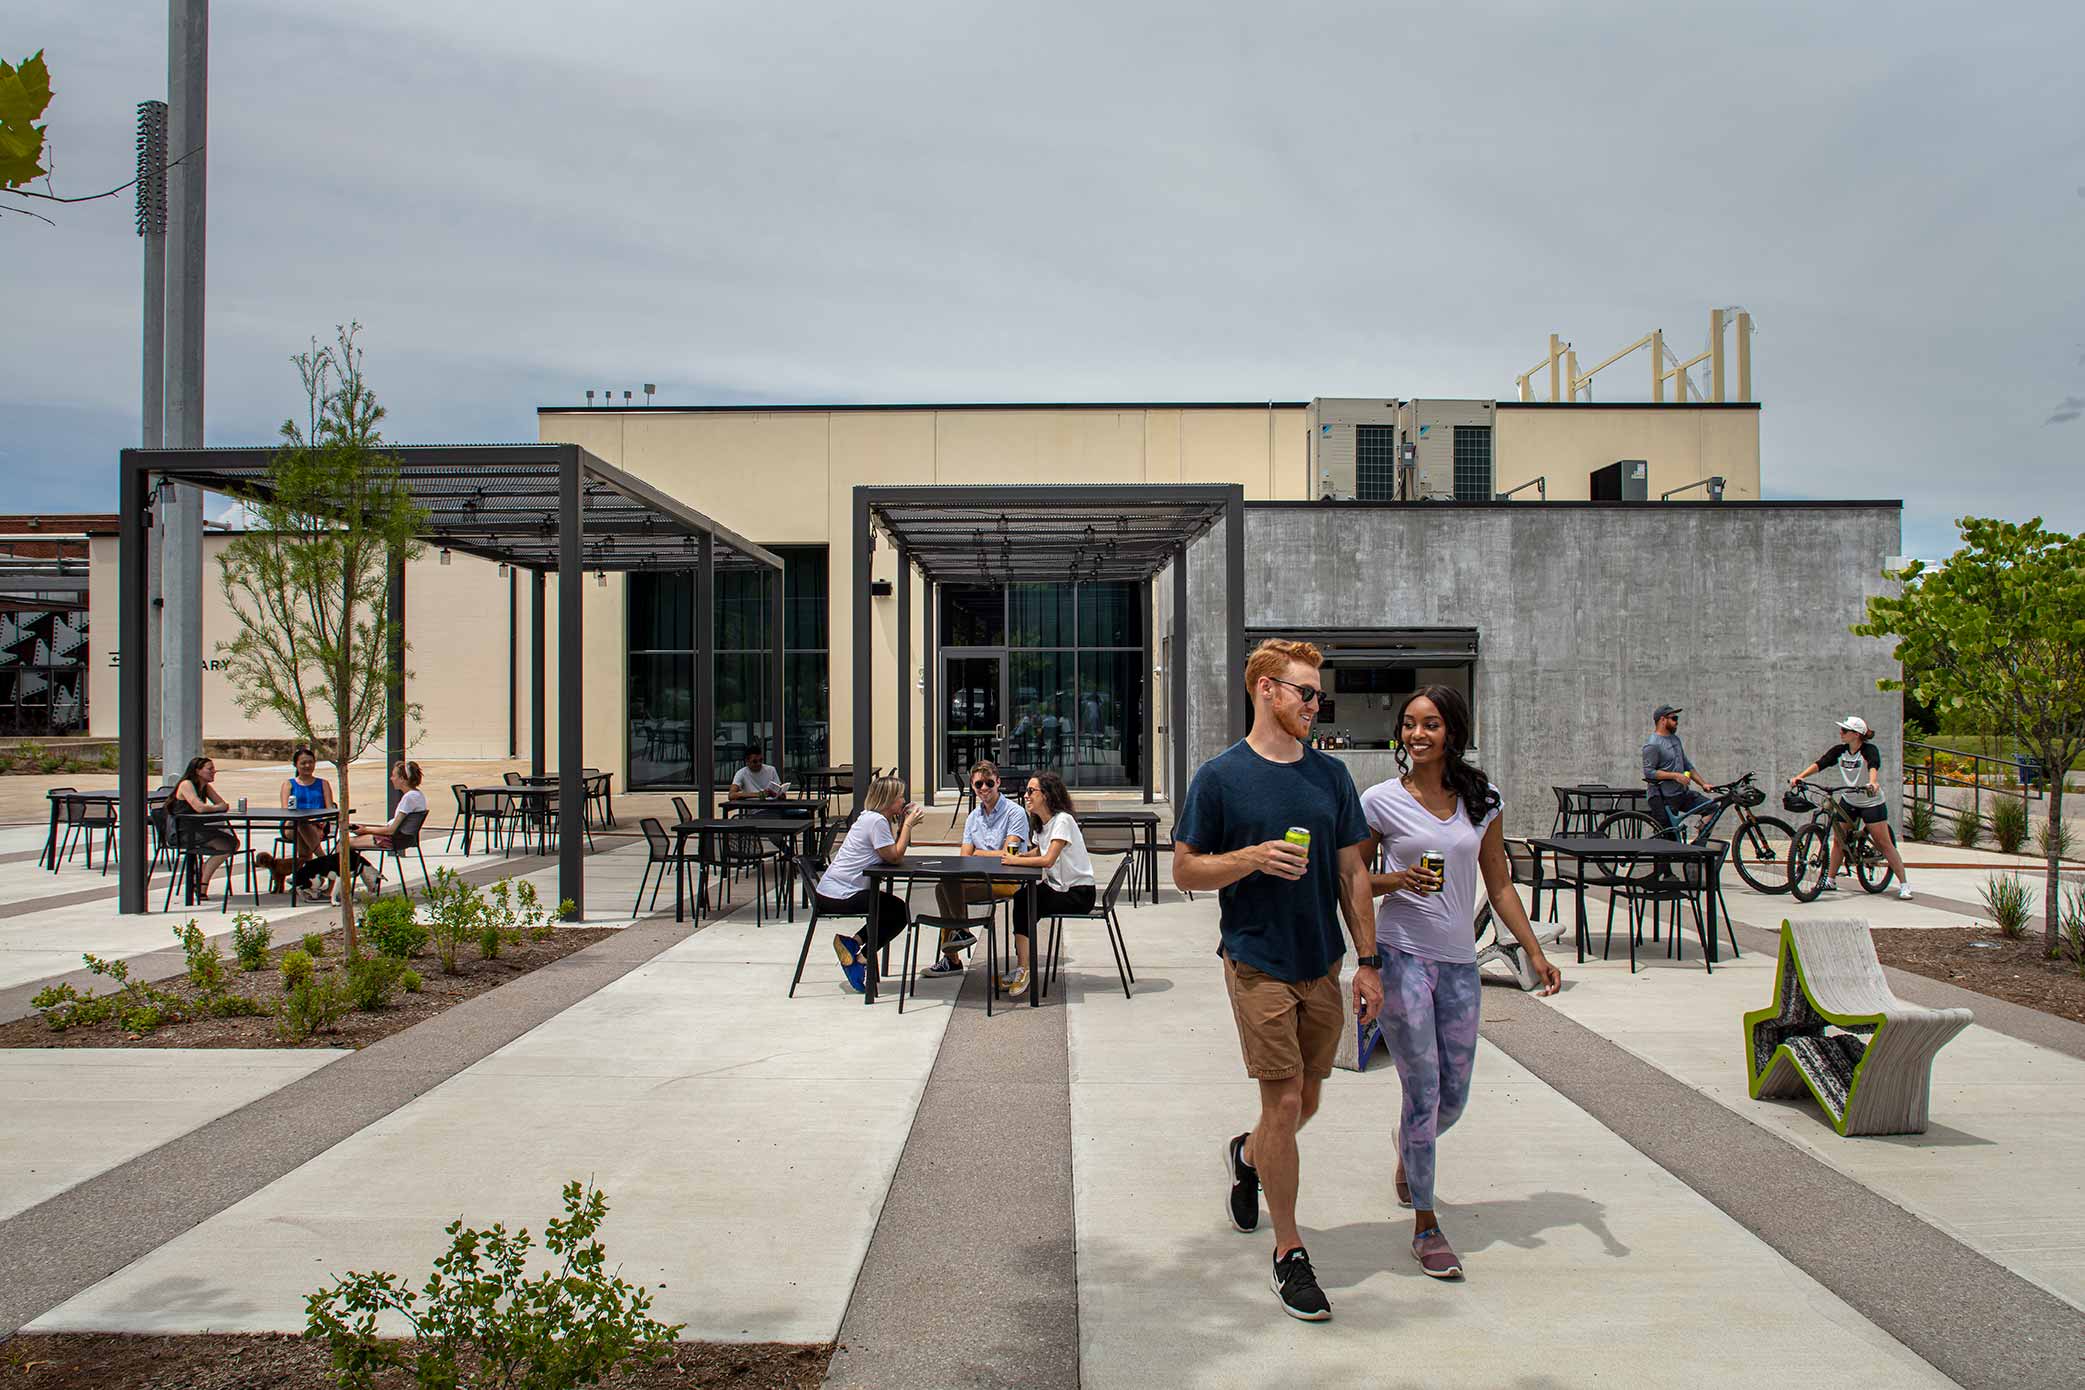 Courtyard area with groups of people at tables with beverages man and women with beverages walks toward foreground